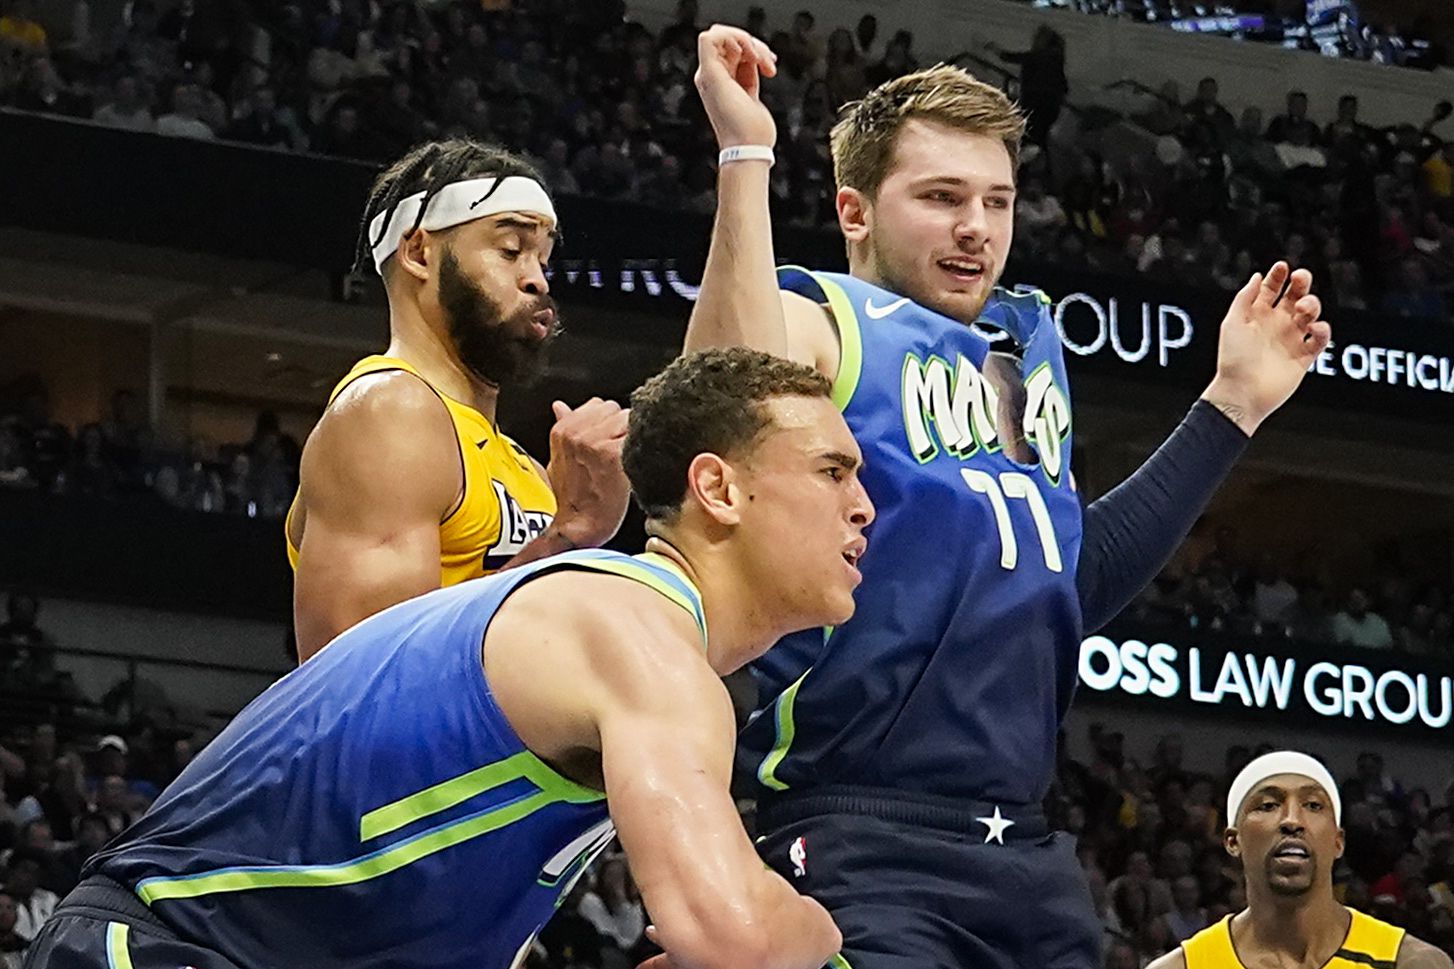 Luka Doncic rips jersey in anger in Mavericks' game vs. Lakers